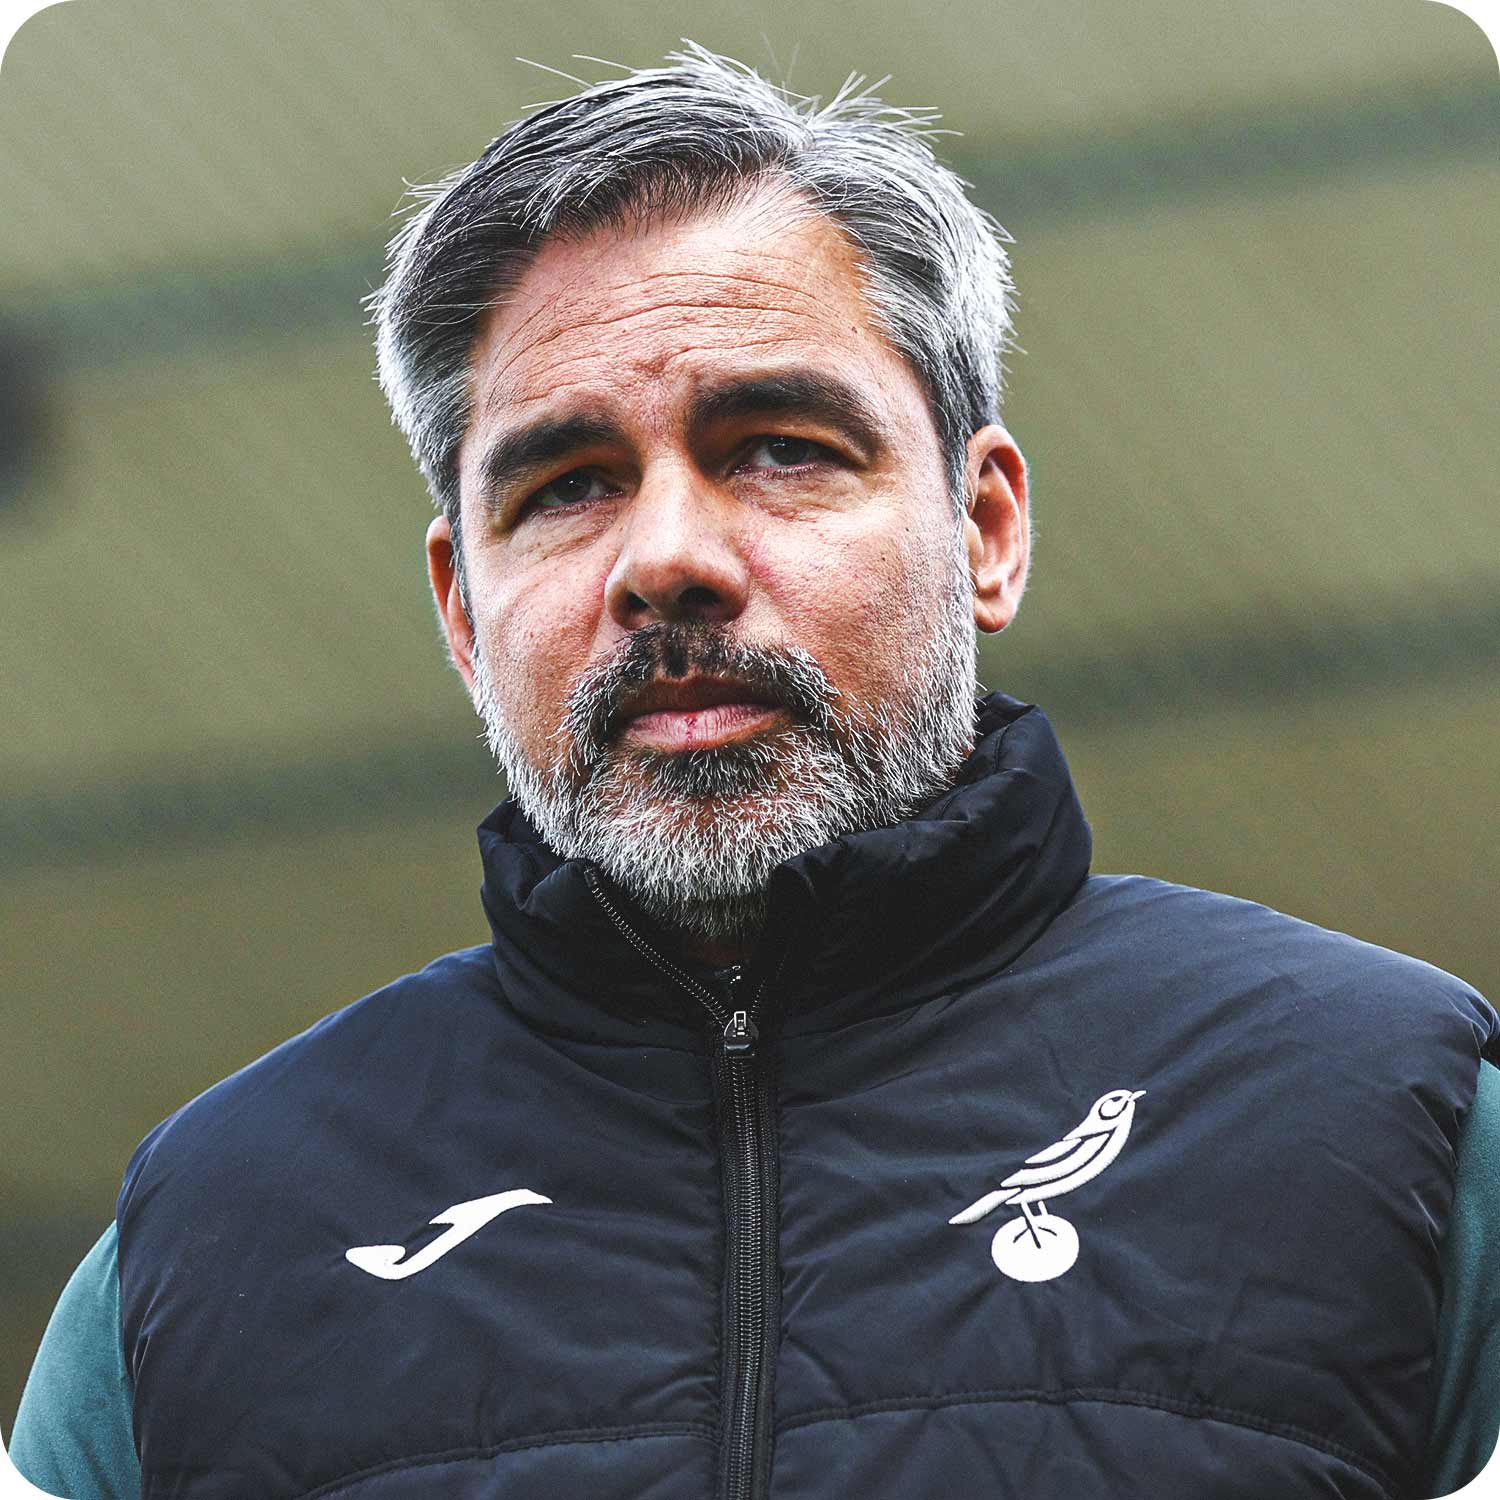 Photograph of the Norwich City manager David Wagner